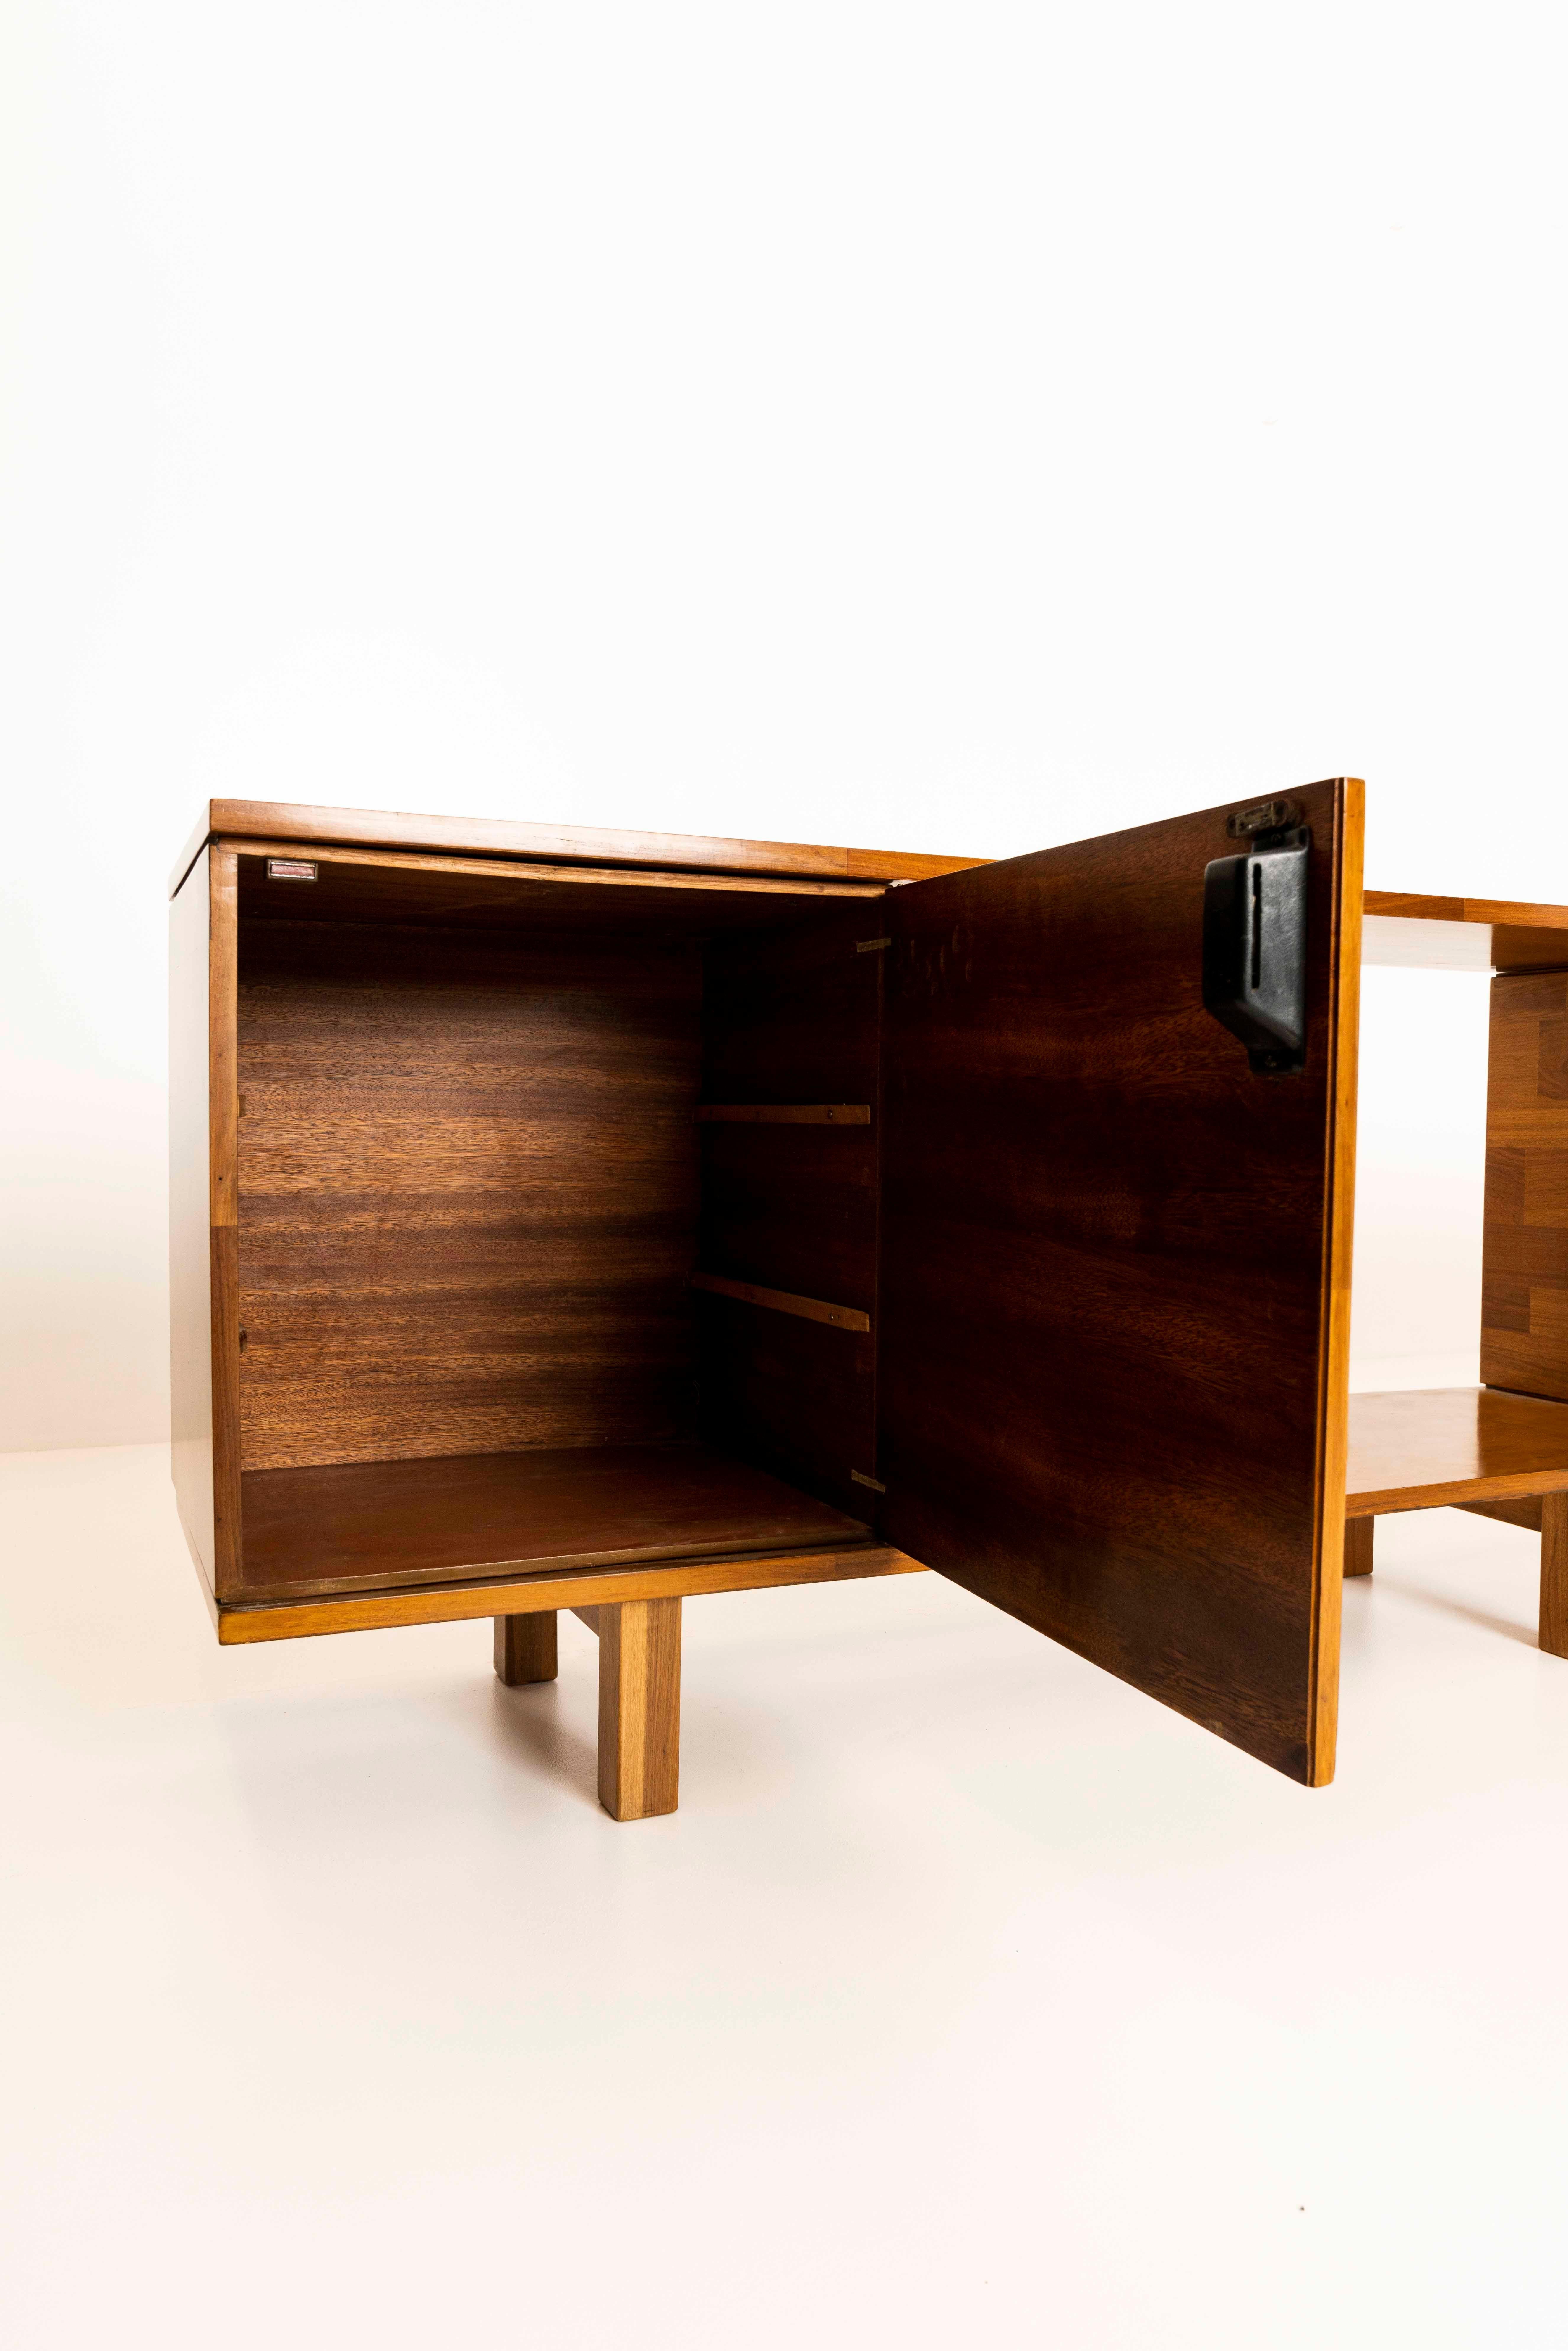 Mid-Century Modern Sideboard by Jorge Zalszupin in Imbuia Wood for L’atelier, Brazil 1960s For Sale